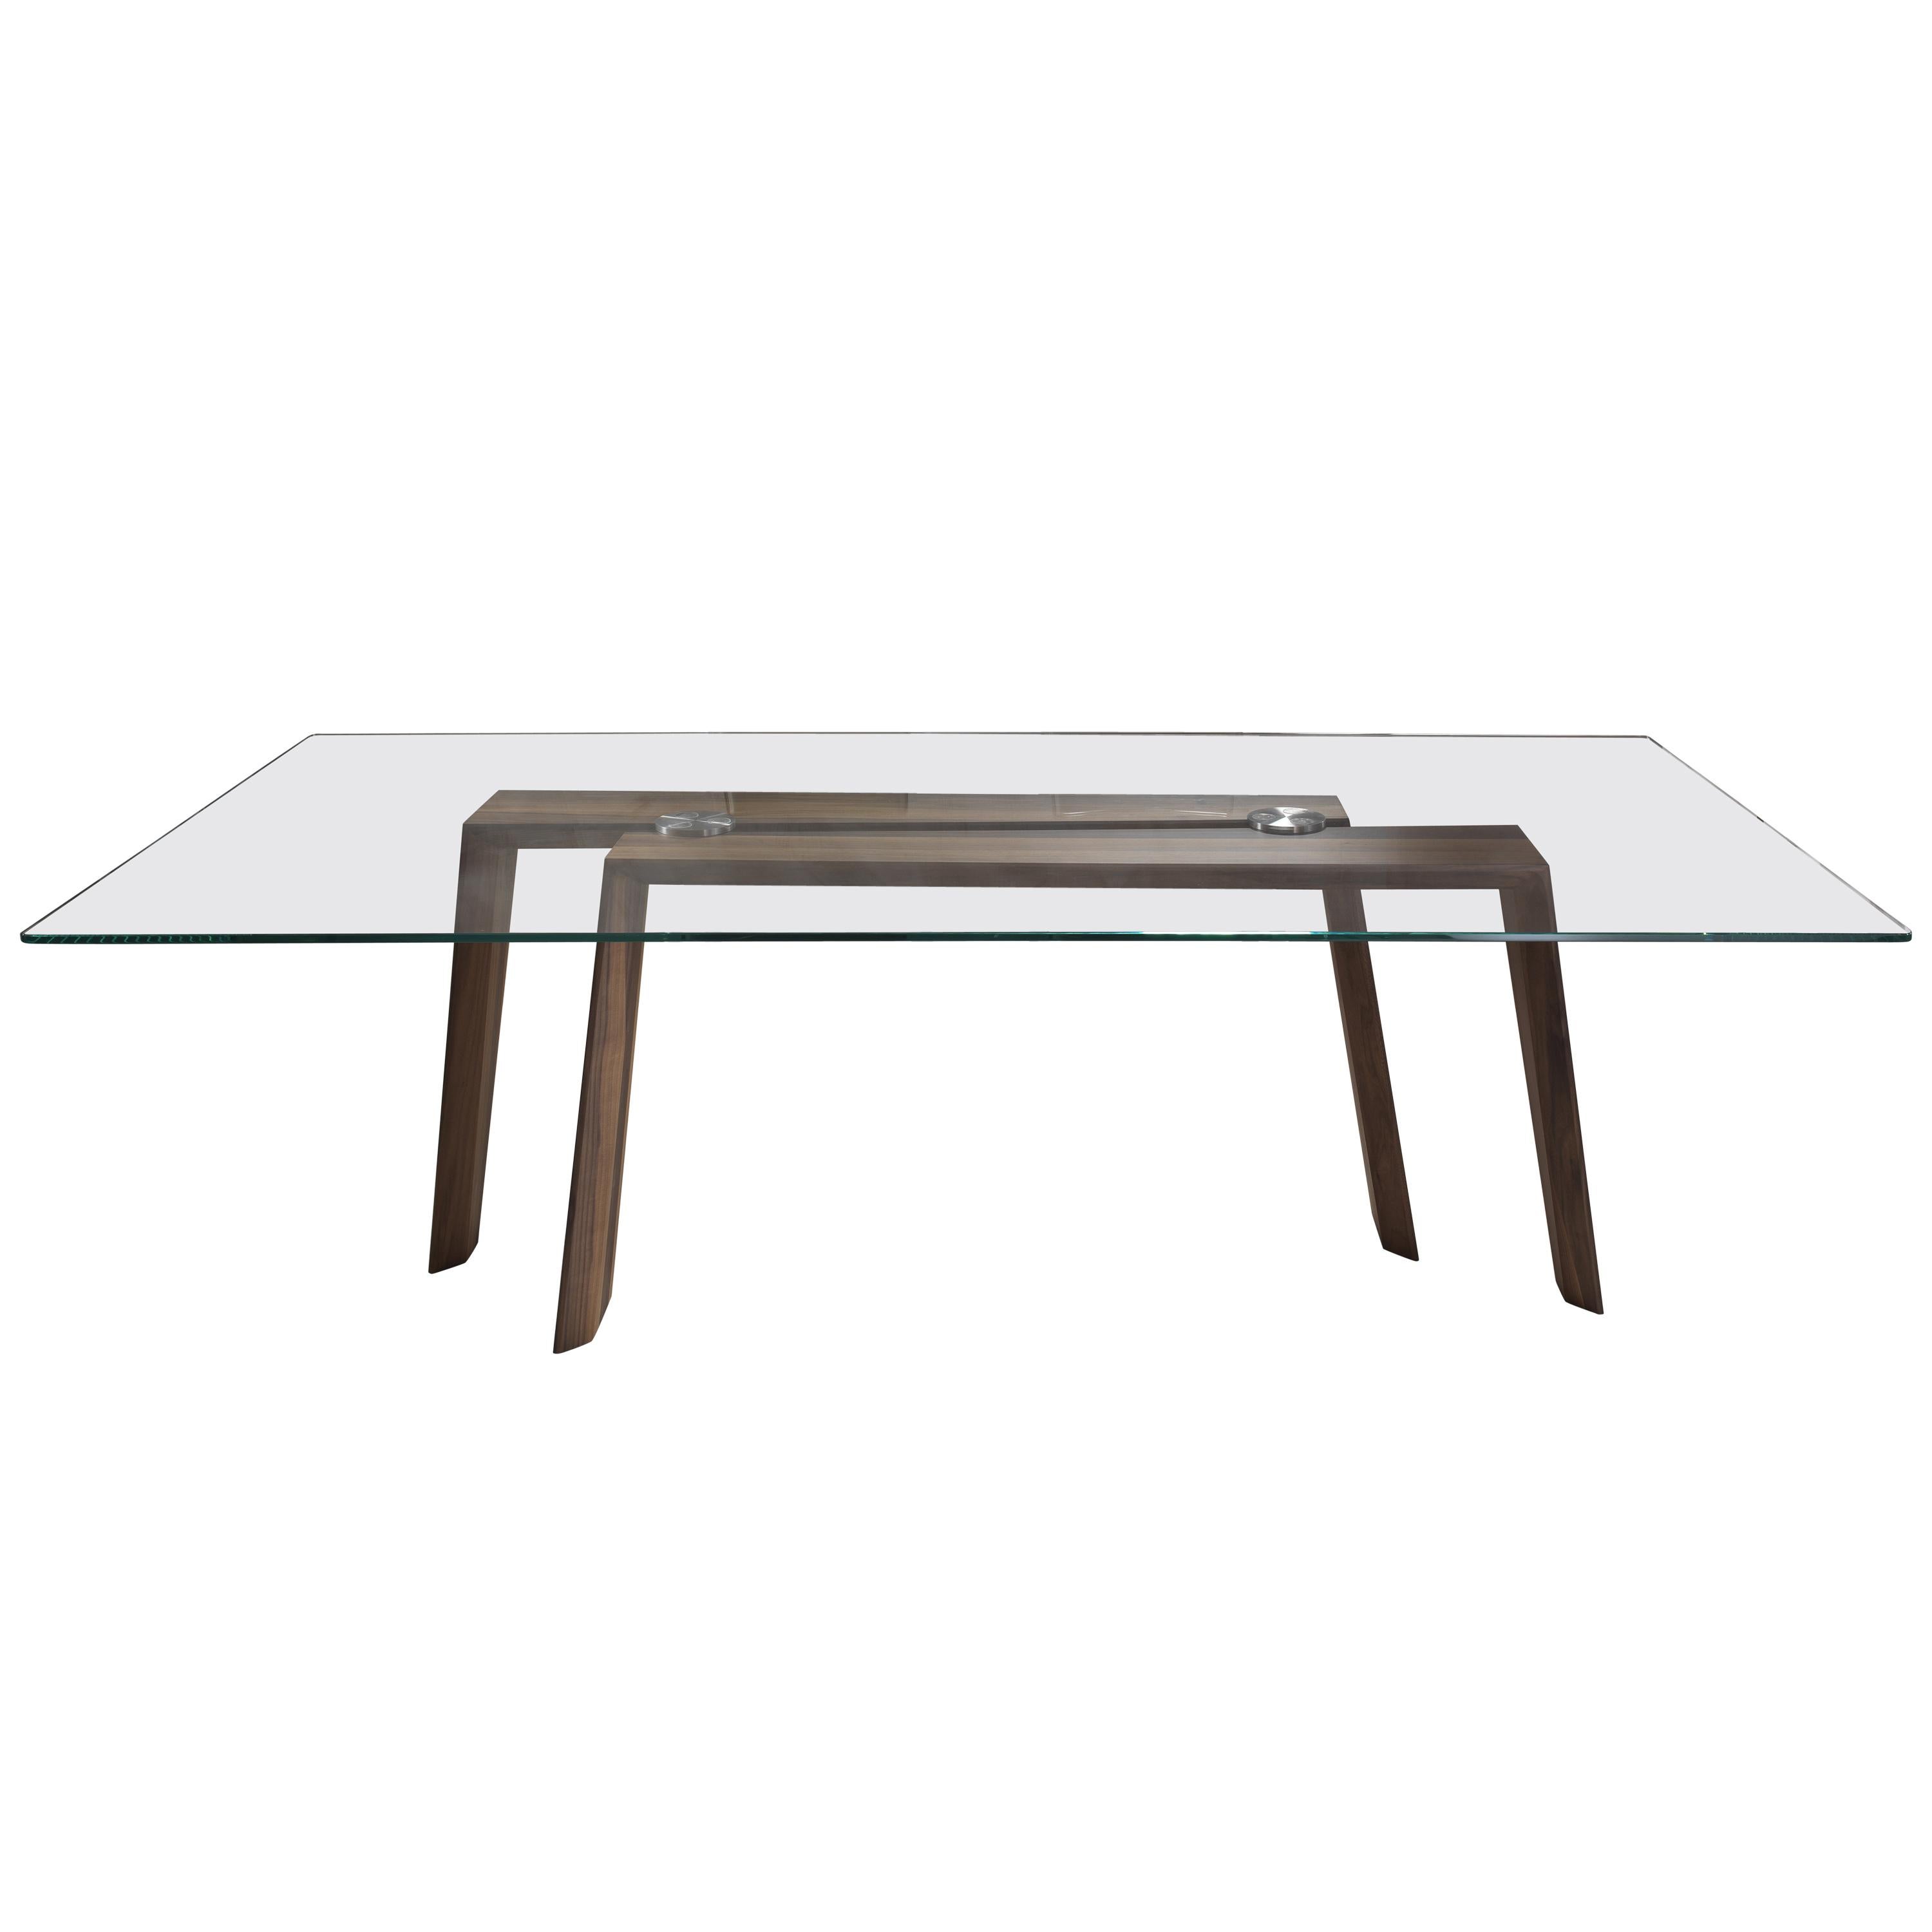 Pacini & Cappellini Ten for Ten Wood Table by Giuliano & Gabriele Cappellettii For Sale